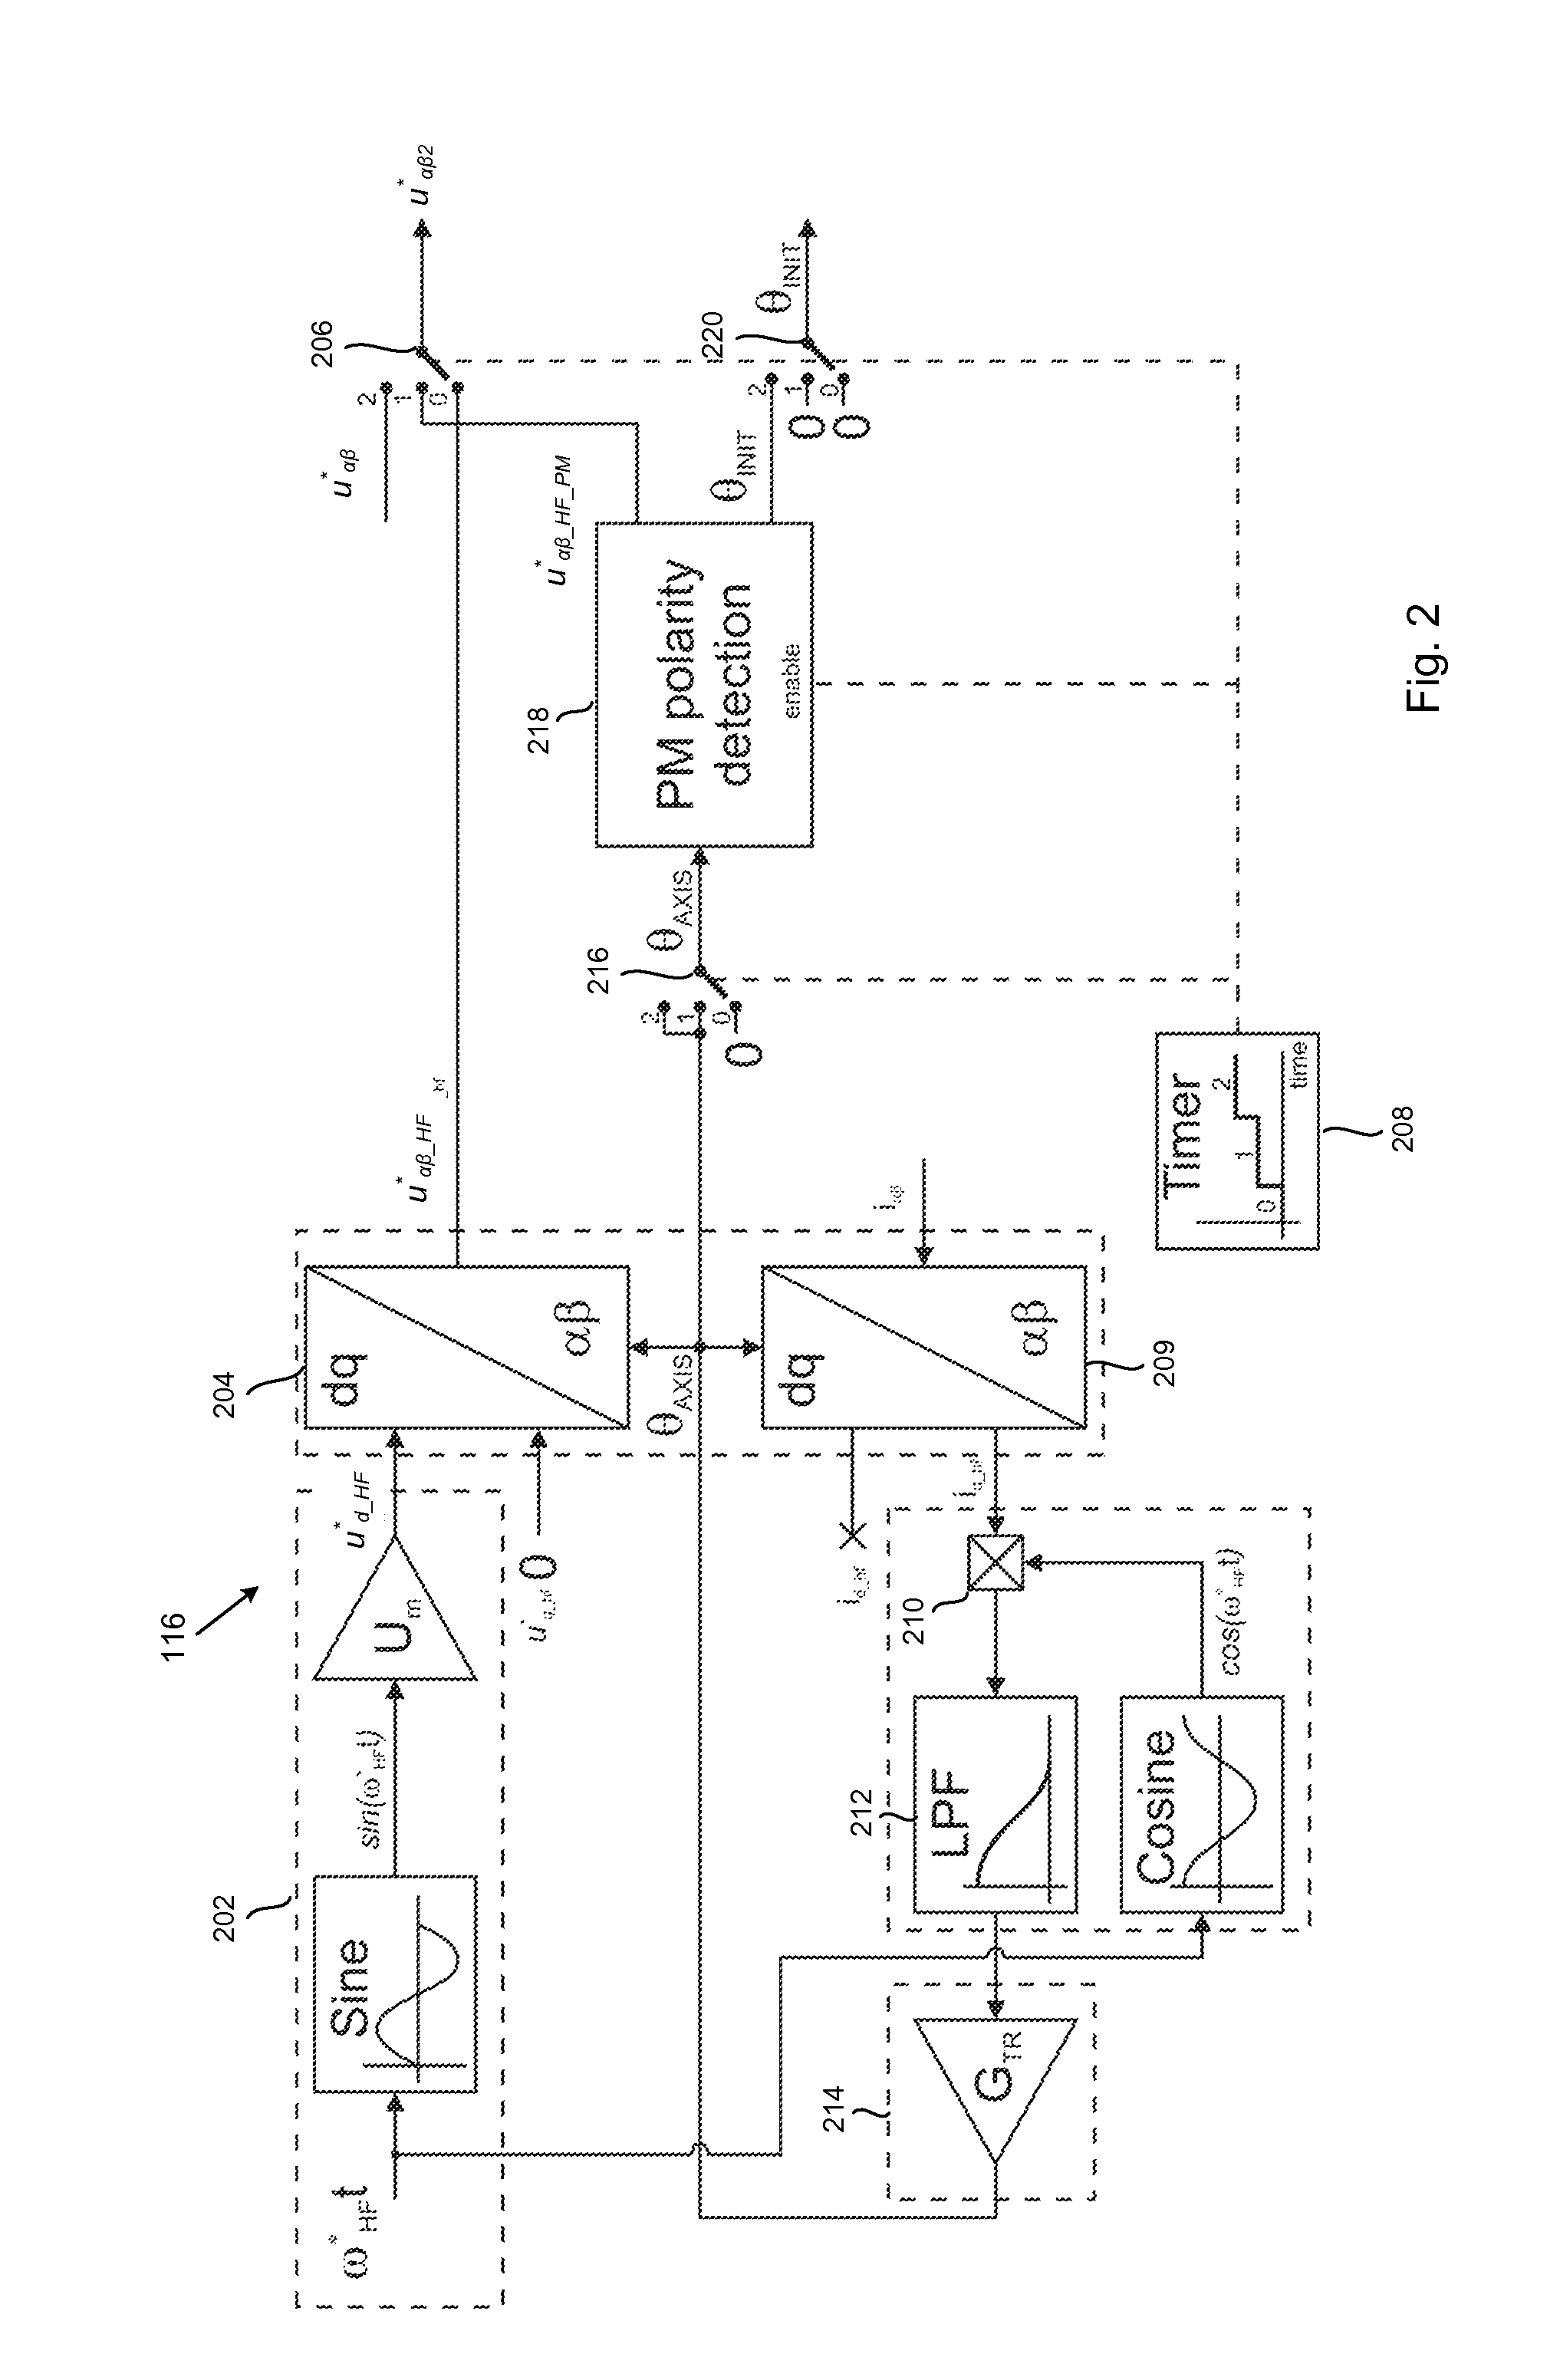 Determining initial rotor position of an alternating current motor